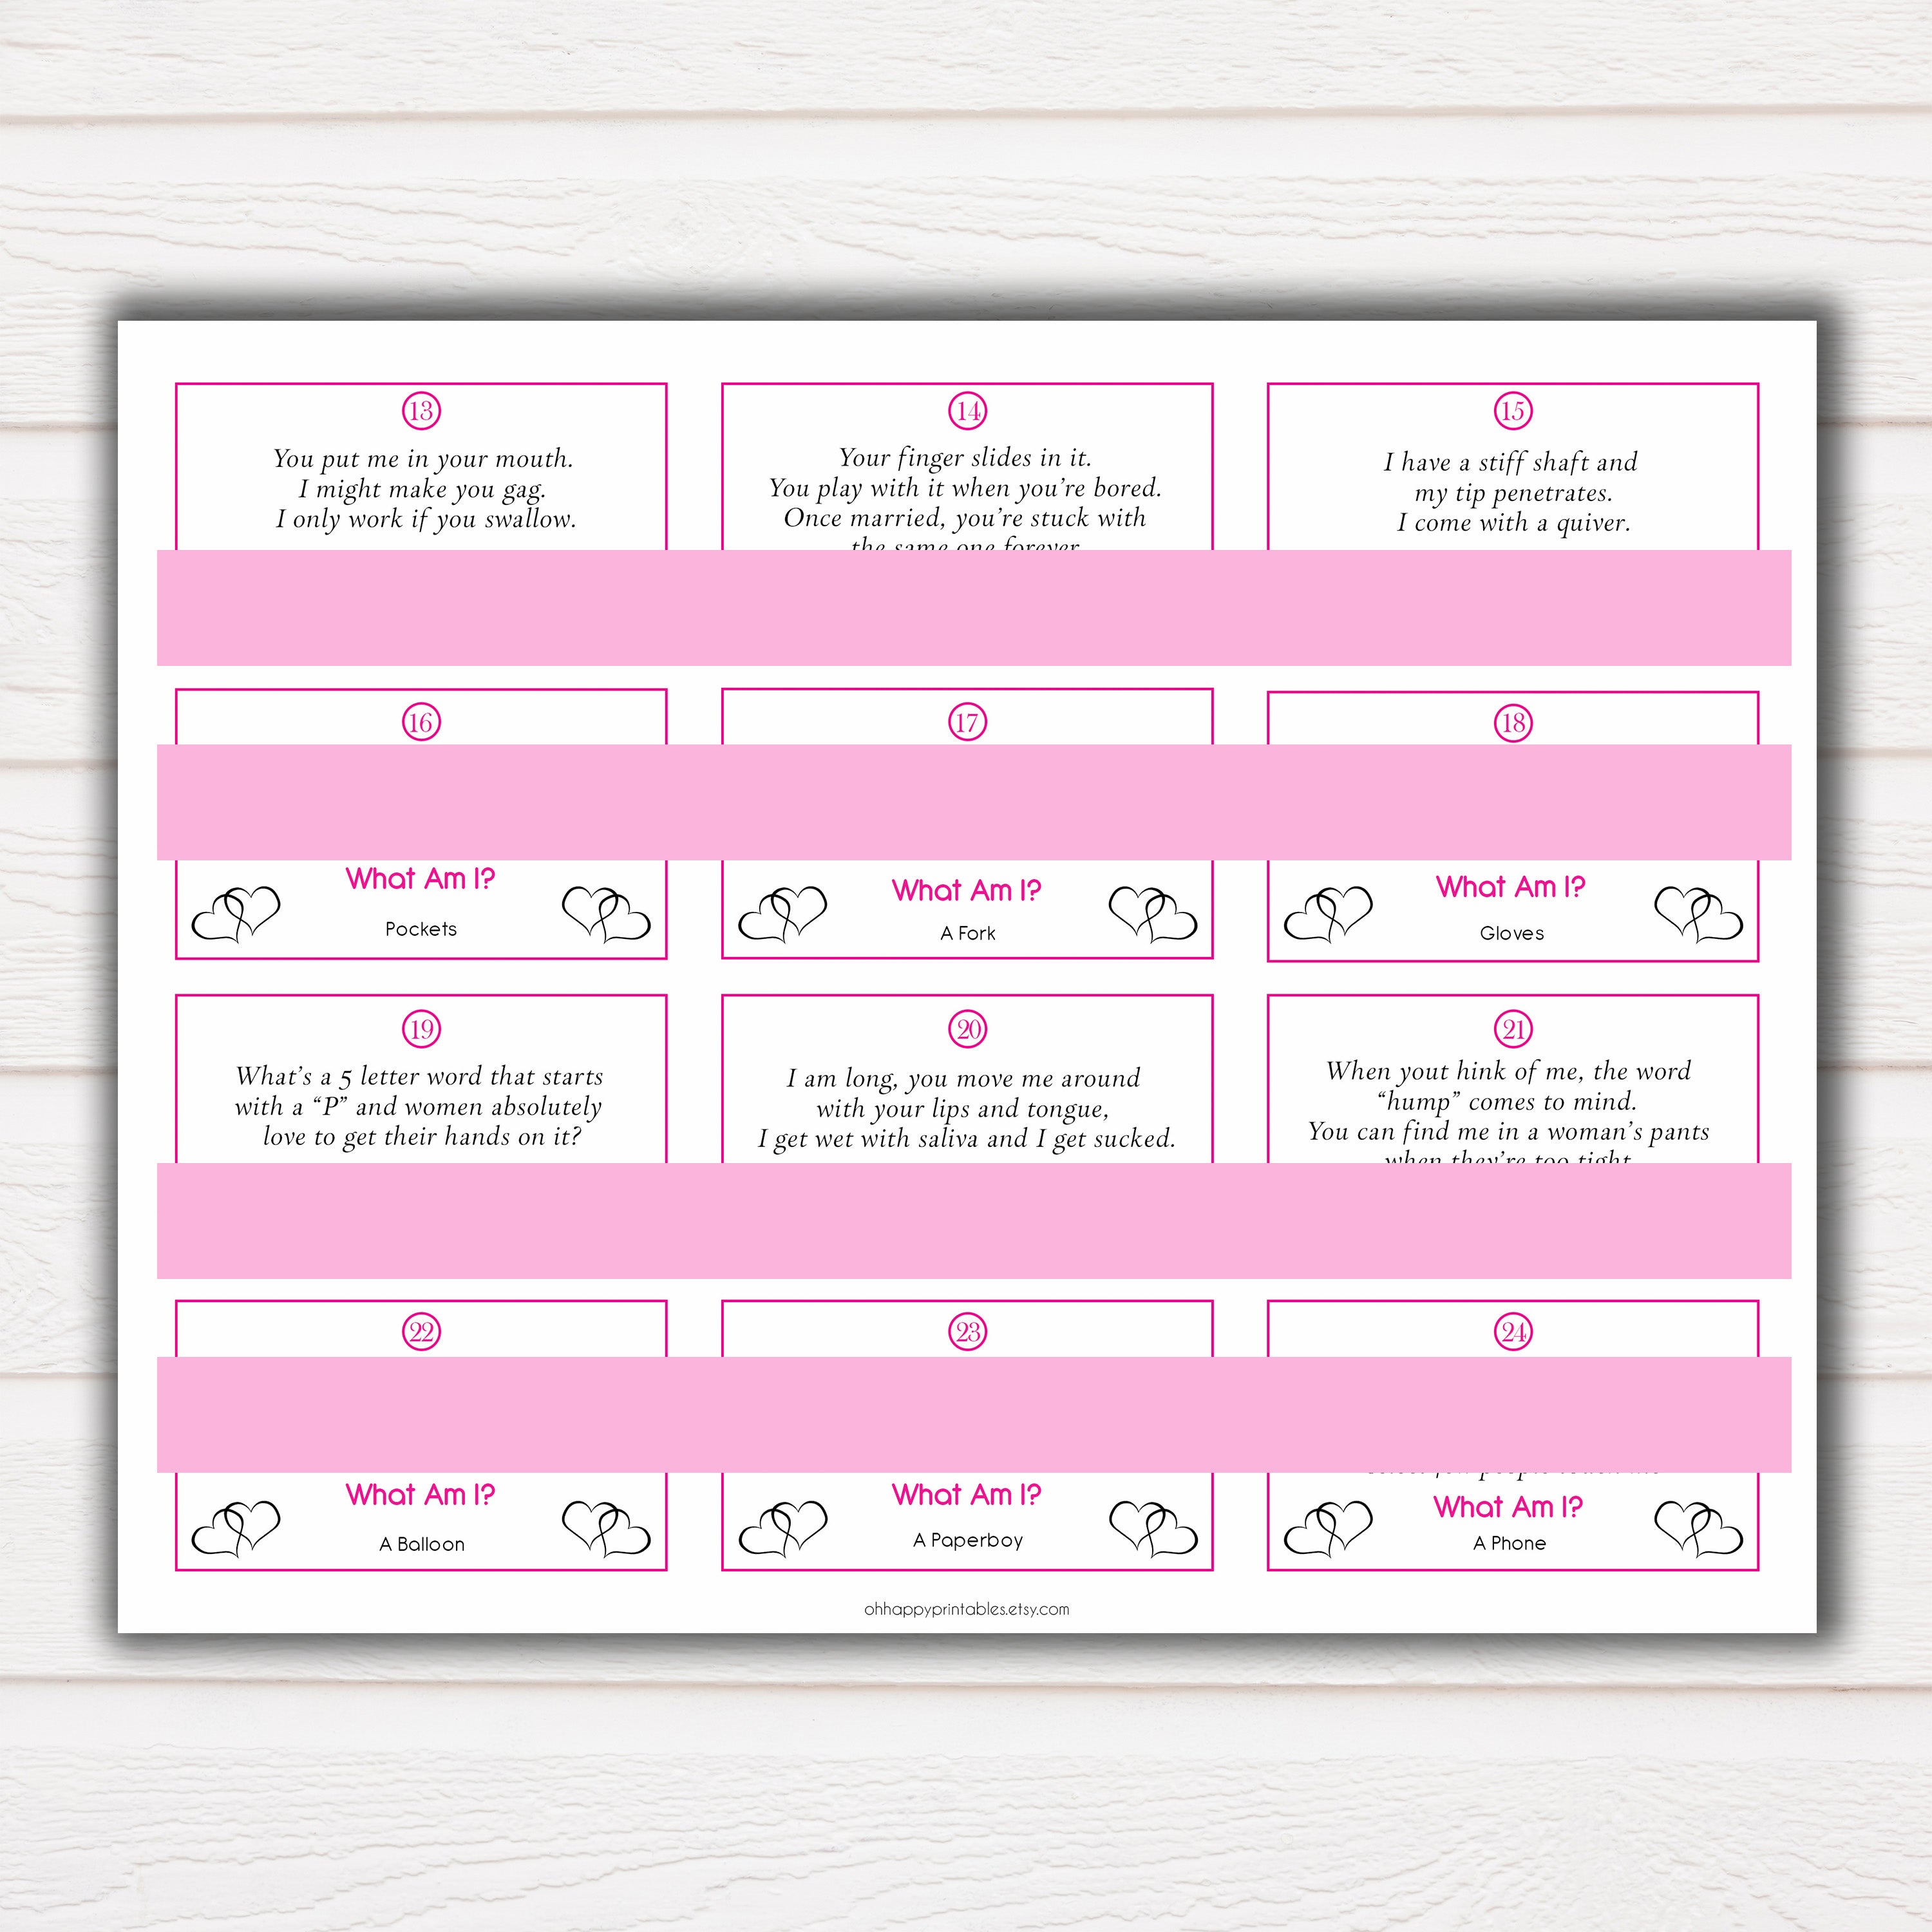 what am I baby game, Printable baby shower games, donut baby games, baby shower games, fun baby shower ideas, top baby shower ideas, donut sprinkles baby shower, baby shower games, fun donut baby shower ideas